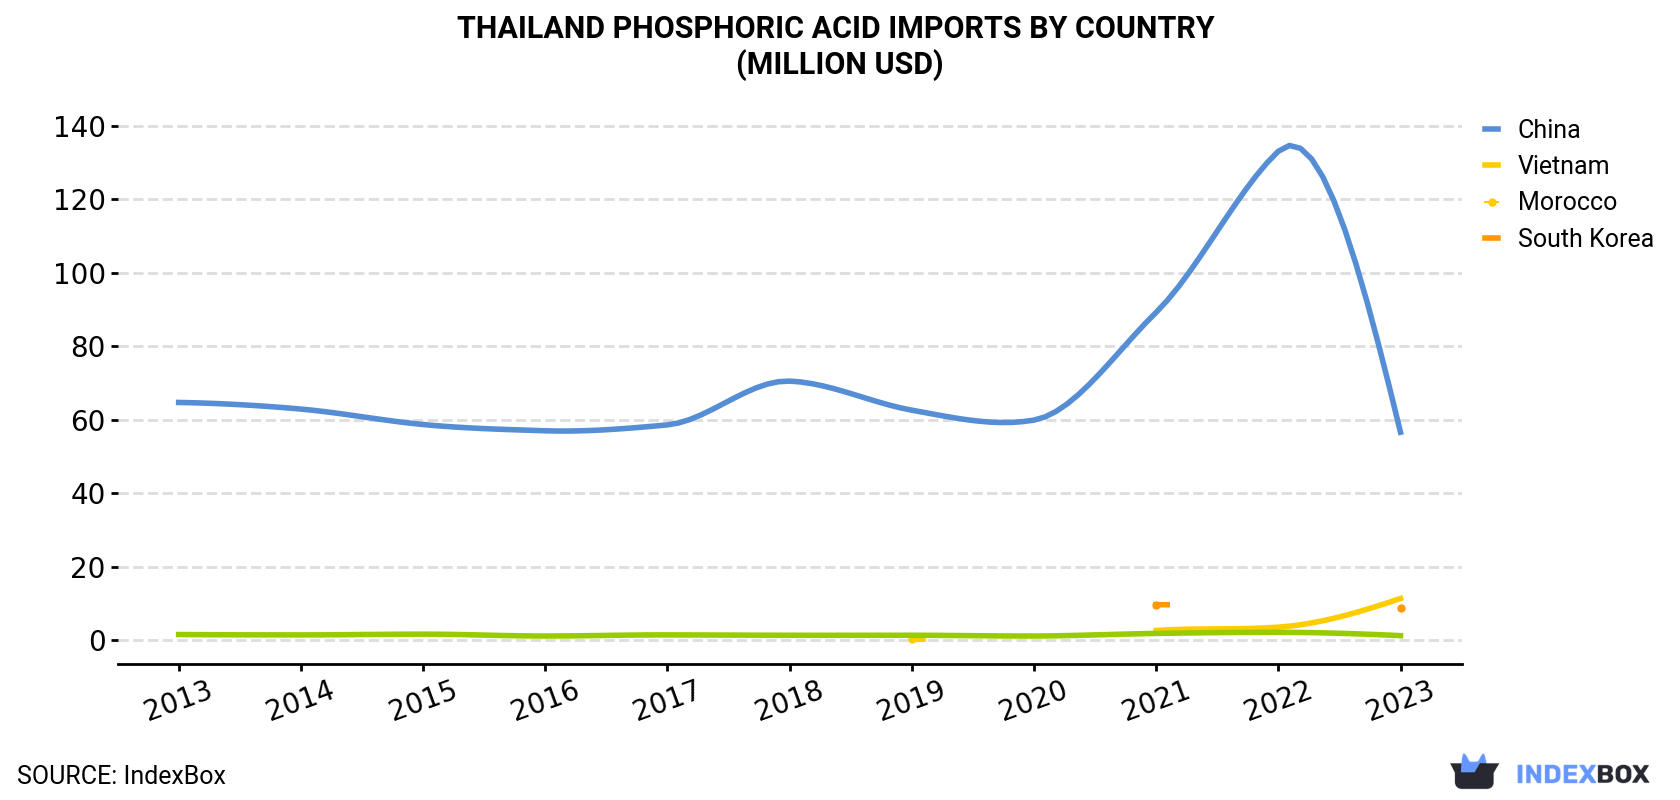 Thailand Phosphoric Acid Imports By Country (Million USD)